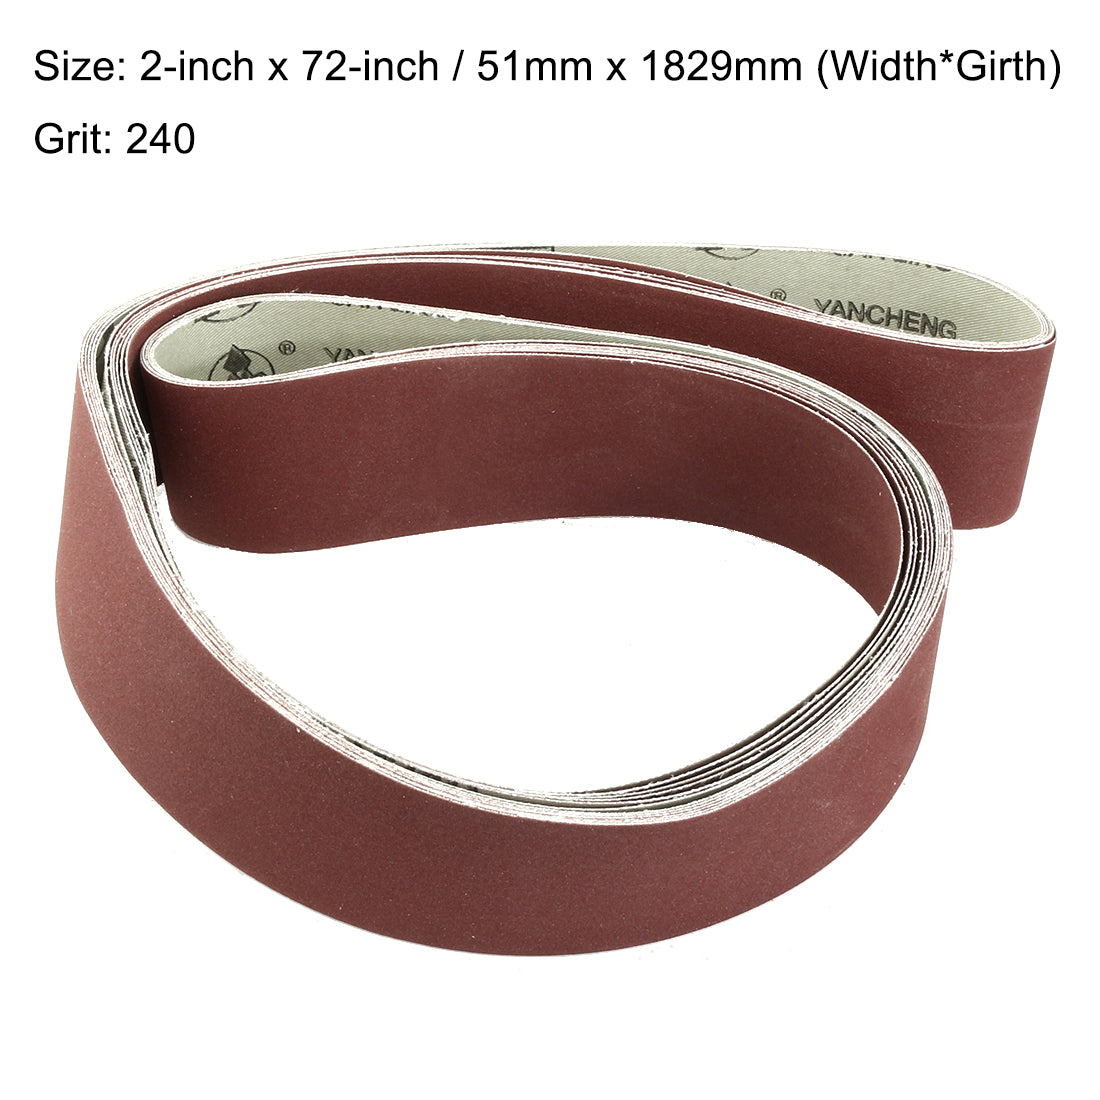 uxcell Uxcell 2-Inch x 72-Inch Aluminum Oxide Sanding Belt 240 Grits Lapped Joint 6pcs